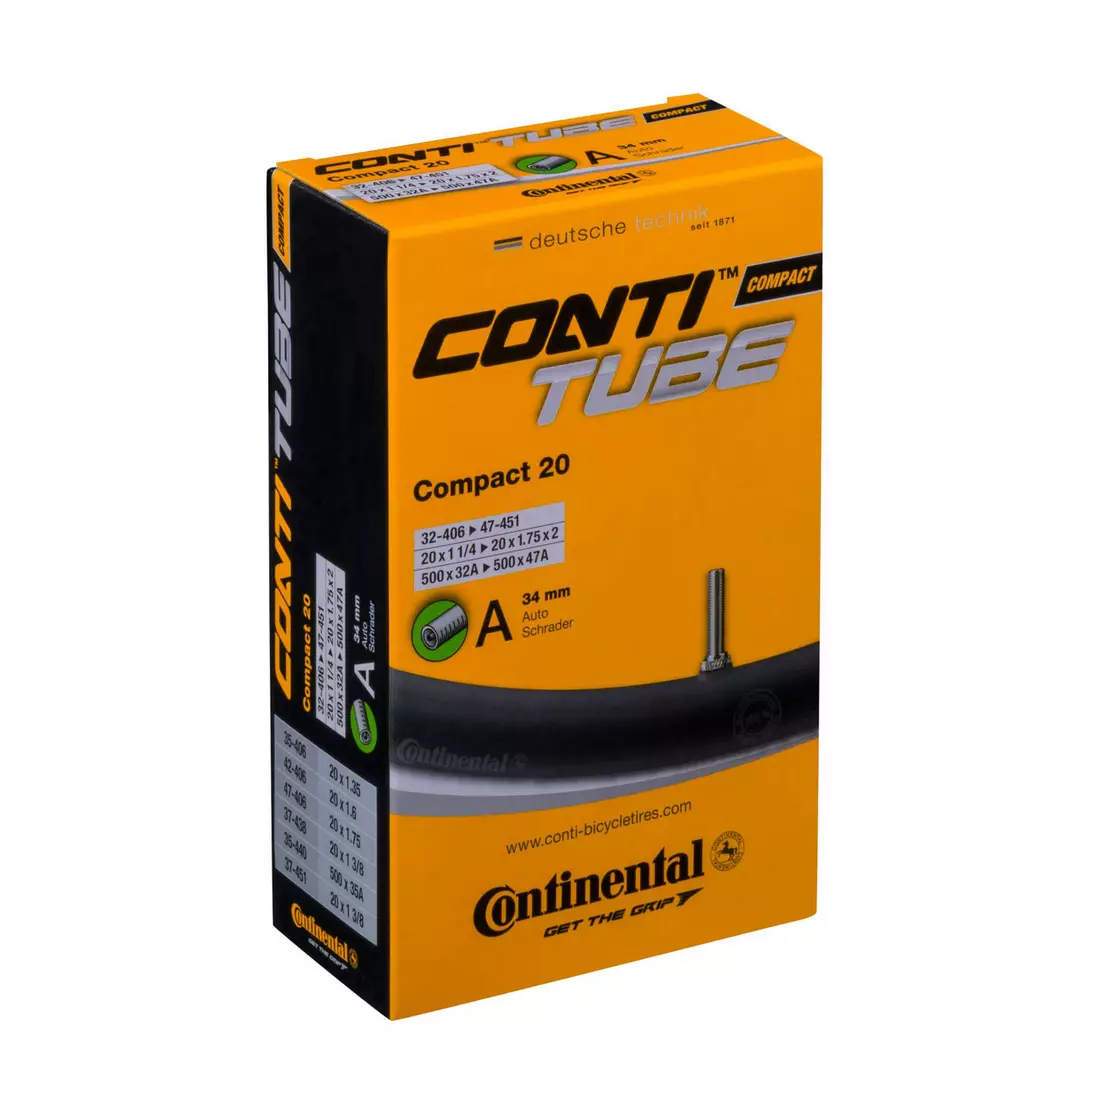 CONTINENTAL COMPACT AUTO 20/1,25 bicycle tube with a 34 mm Schrader valve